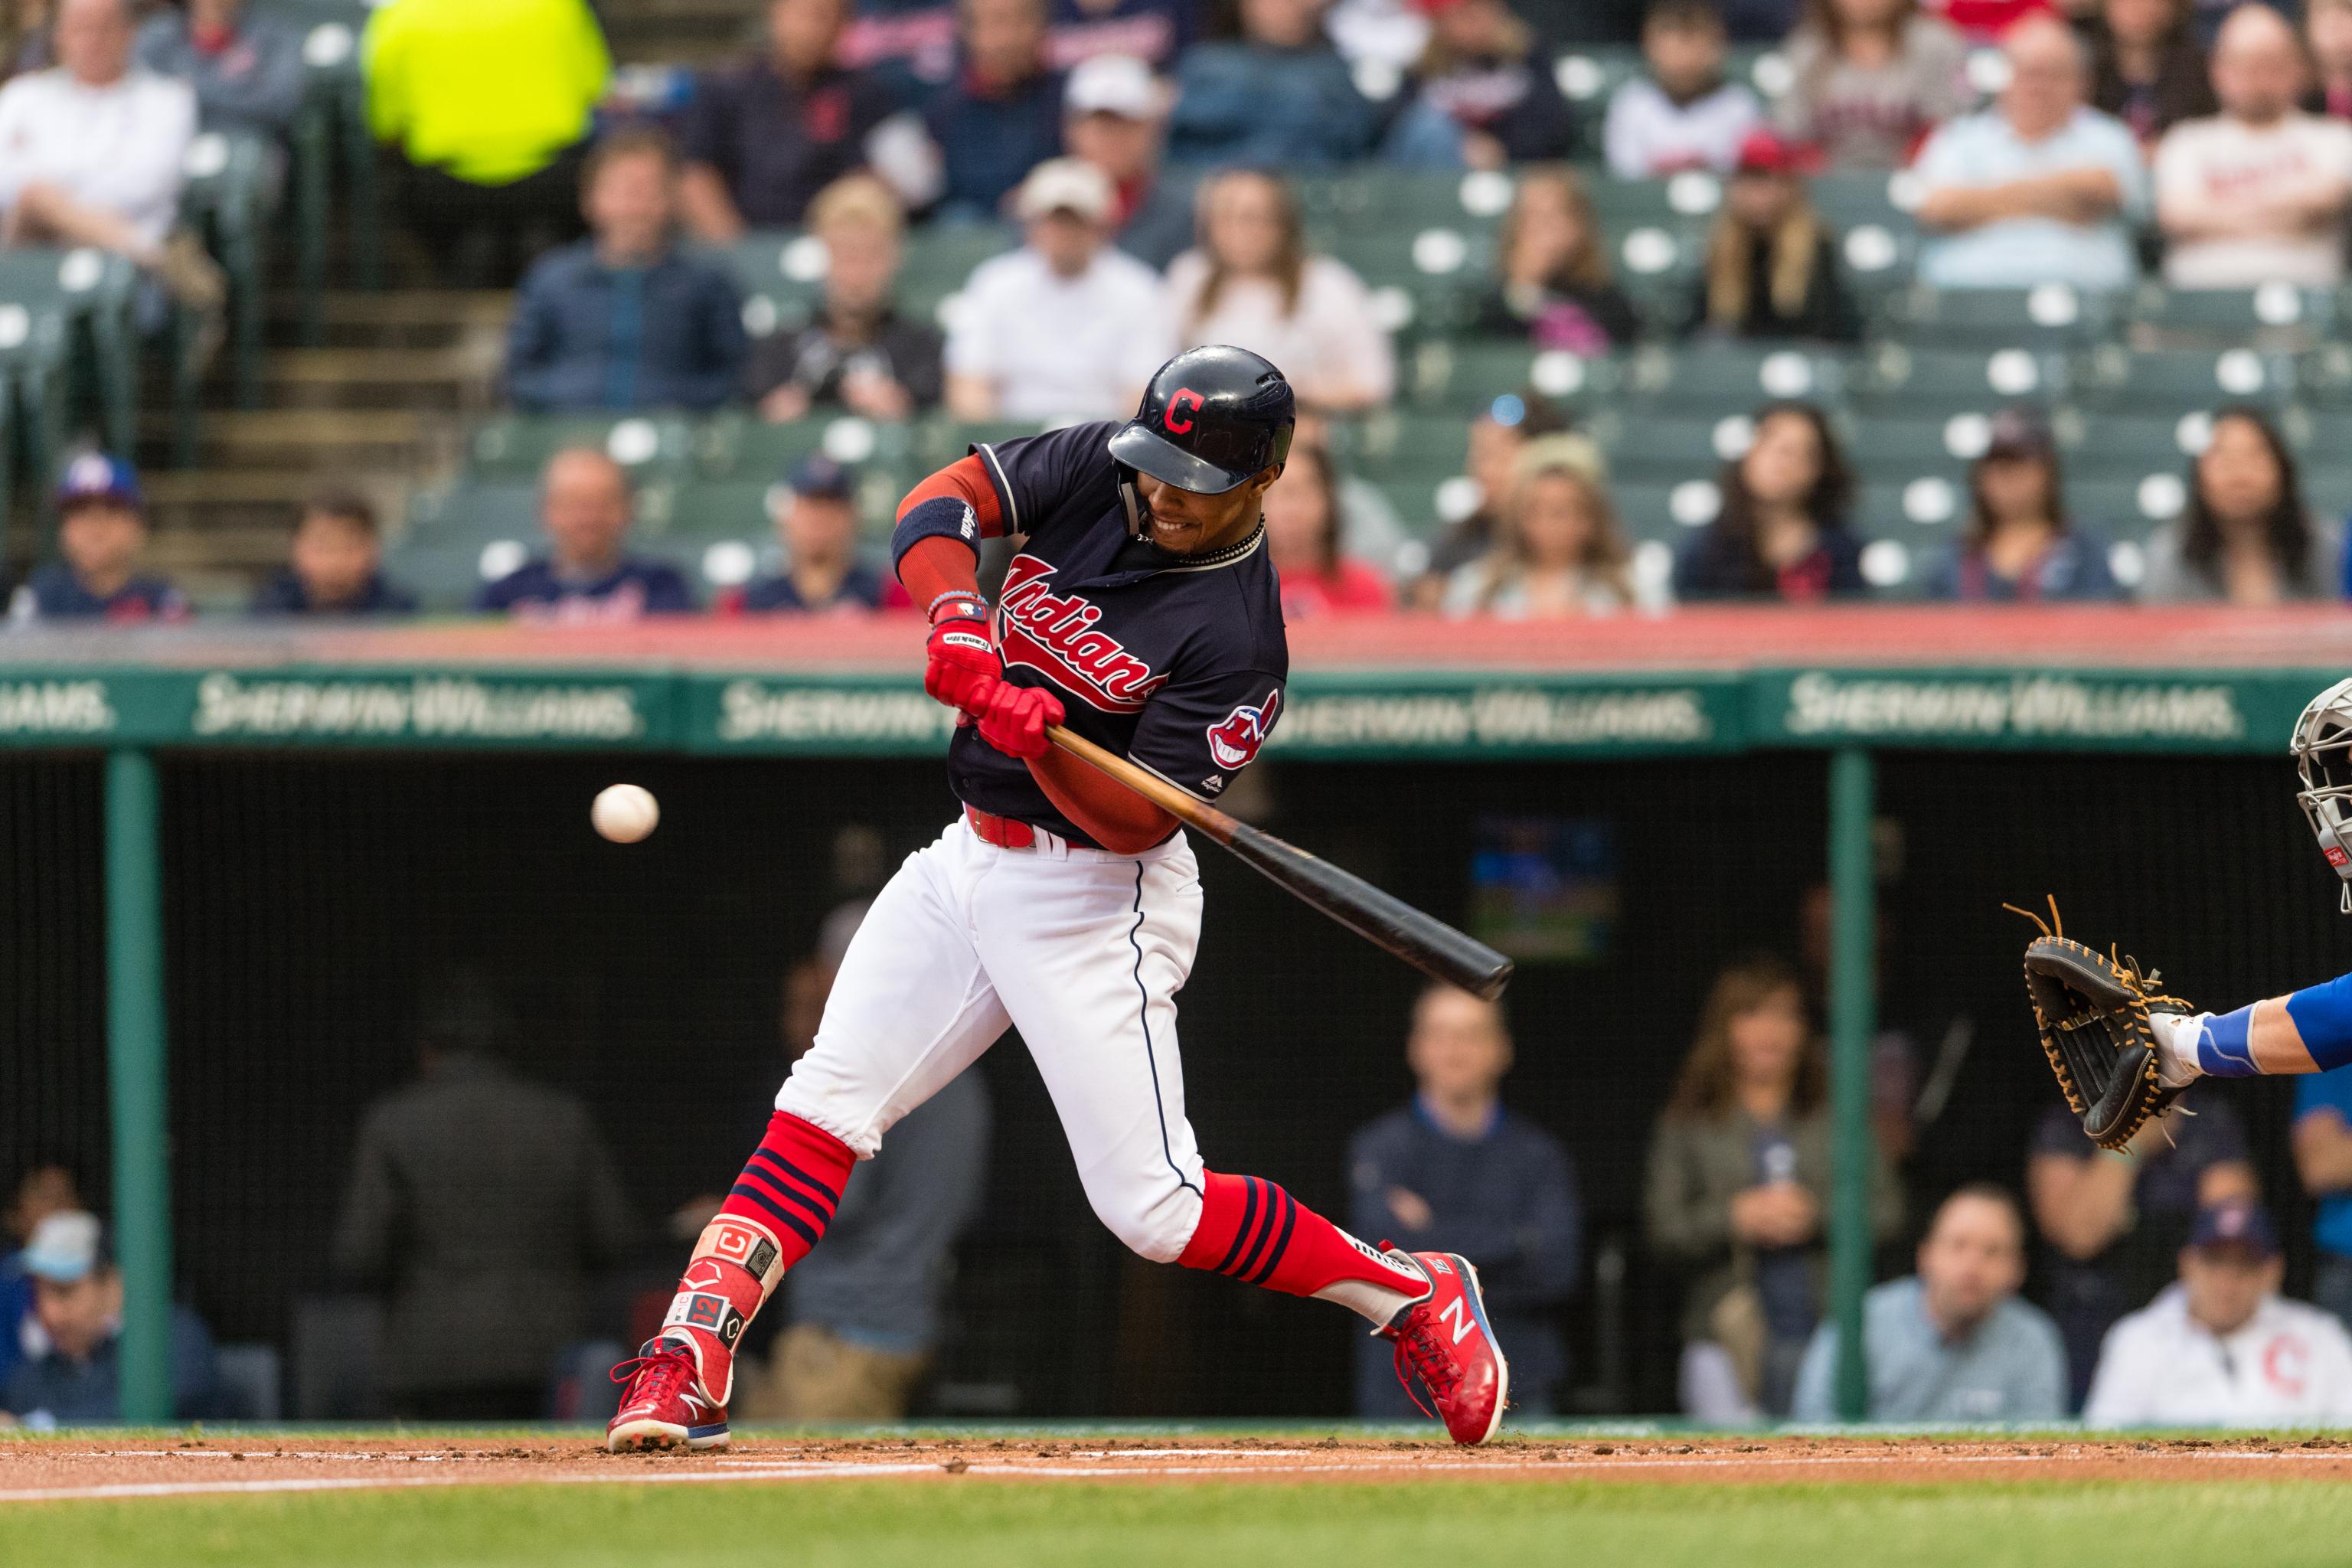 Francisco Lindor legged out epic inside-the-park home run at WBC